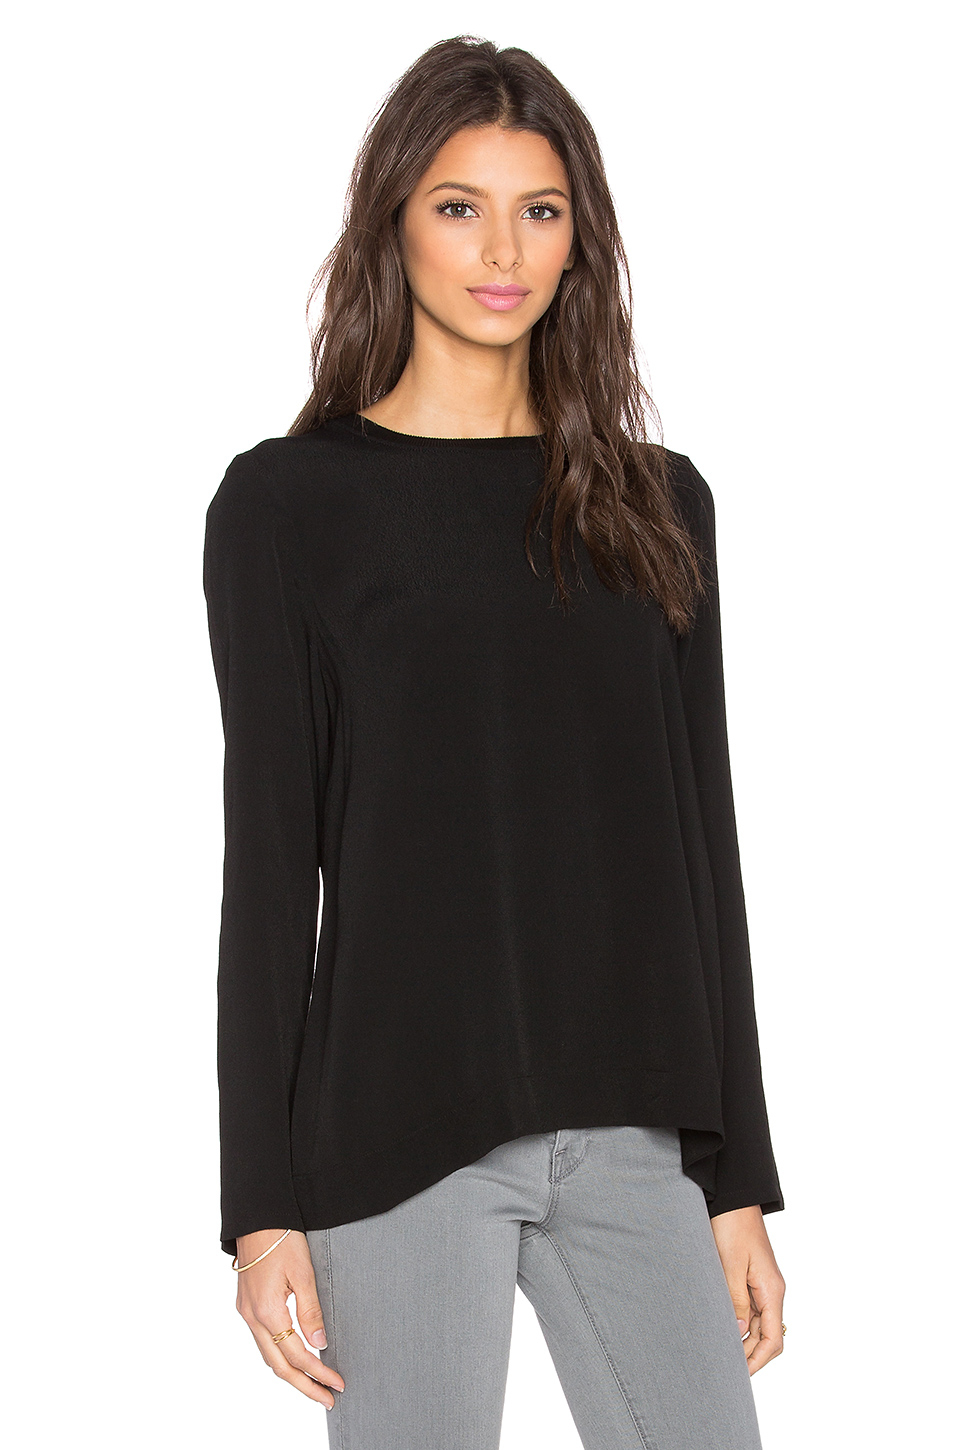 Lyst - Enza Costa Long Sleeve Trapeze Top in Black